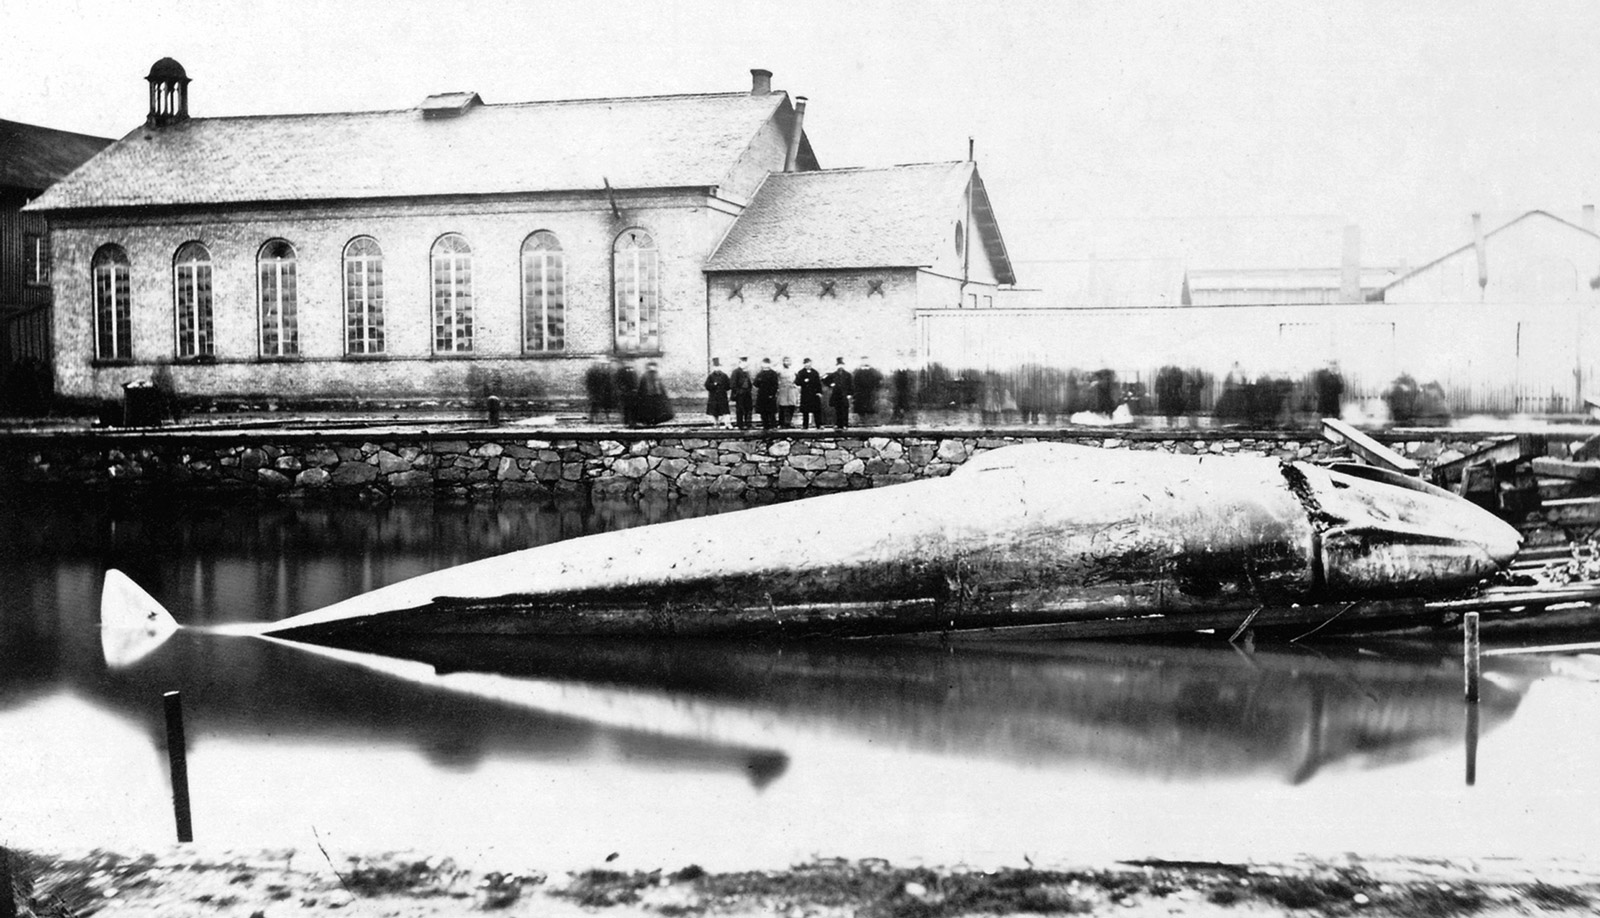 An 1865 photograph of the Malm Whale upon arrival in Gothenburg. 